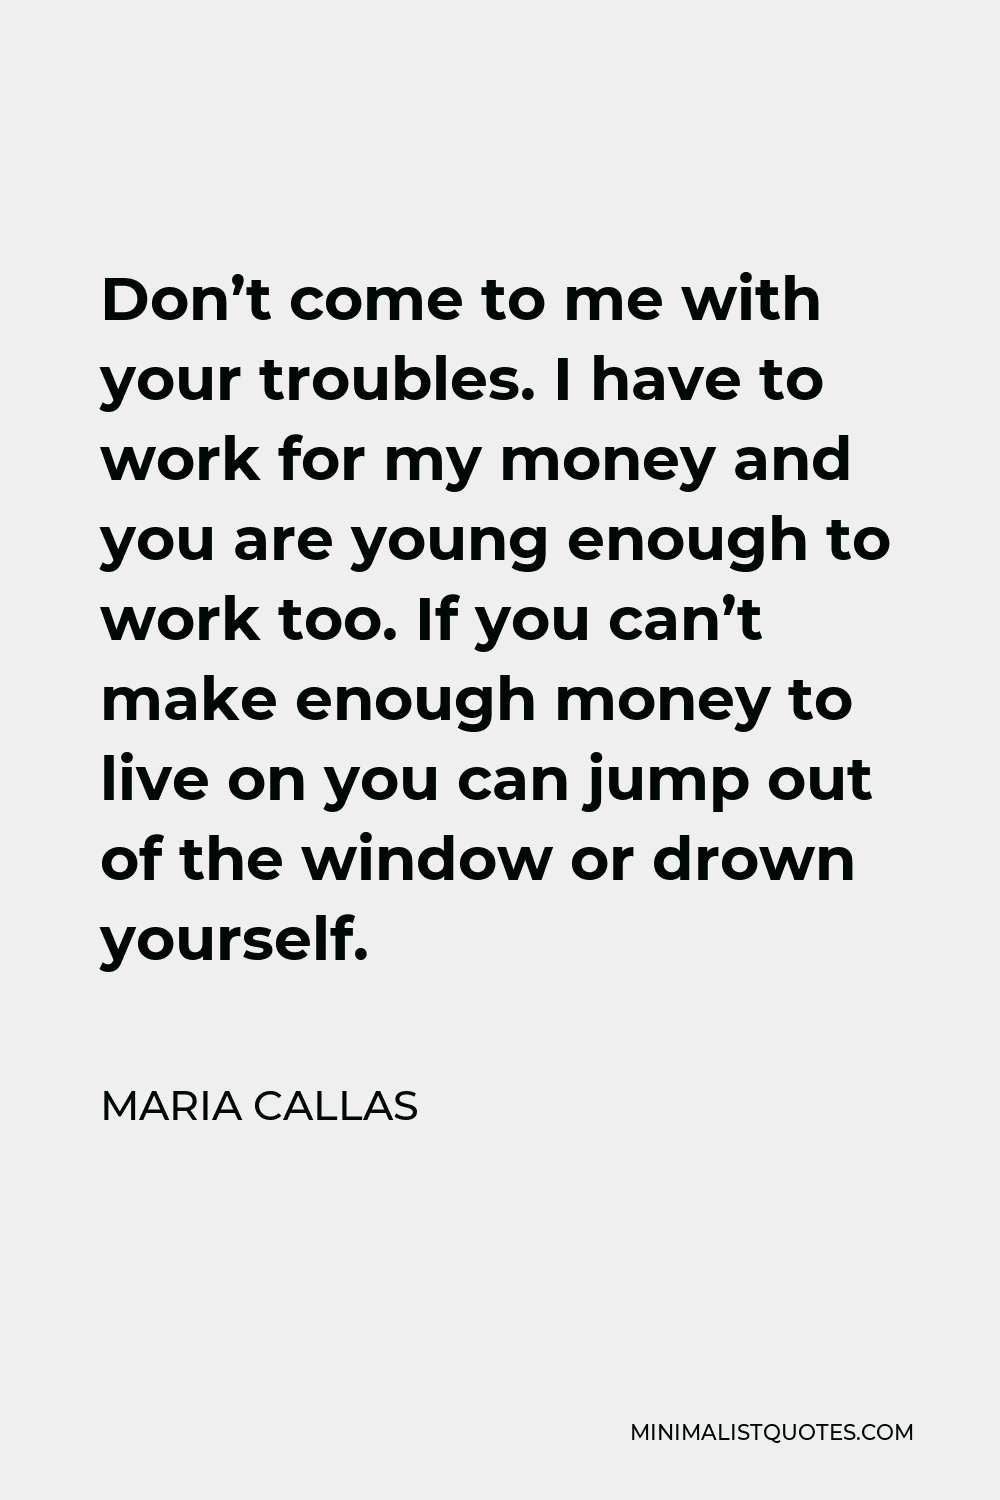 Maria Callas Quote - Don’t come to me with your troubles. I have to work for my money and you are young enough to work too. If you can’t make enough money to live on you can jump out of the window or drown yourself.